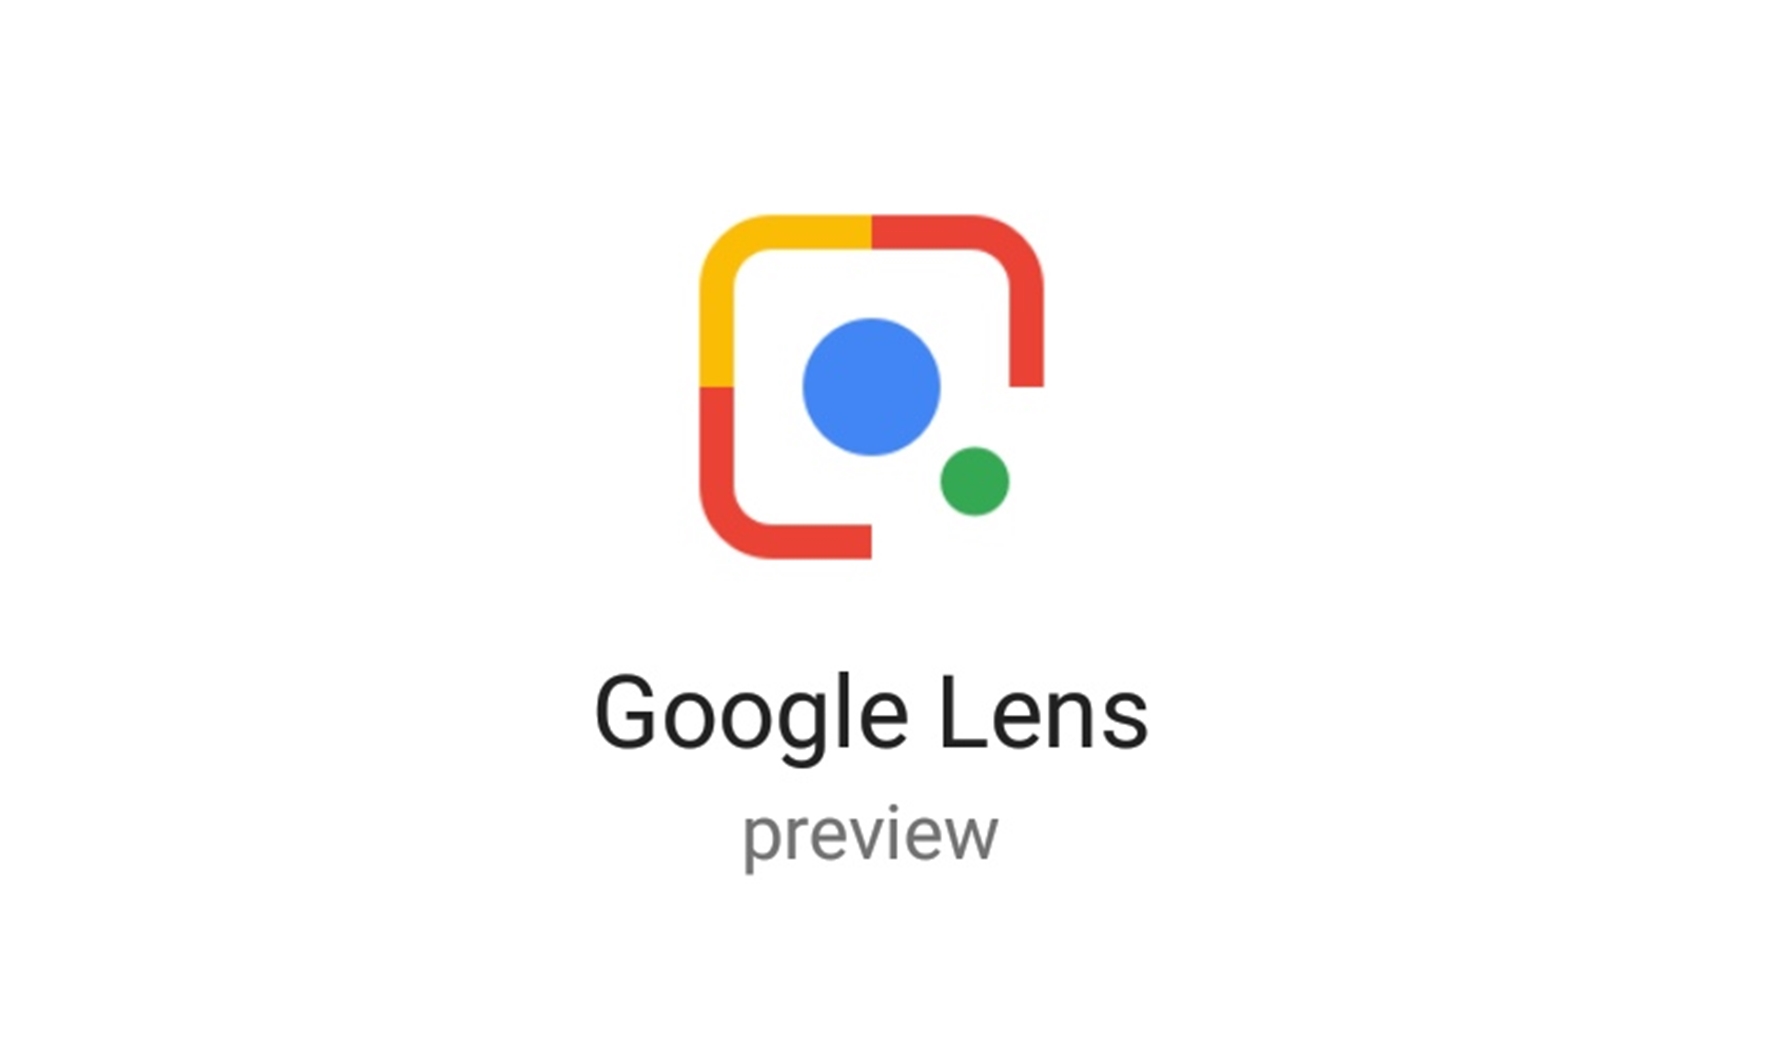 Google Lens On Google Assistant Started Rolling Out To Non-Pixel